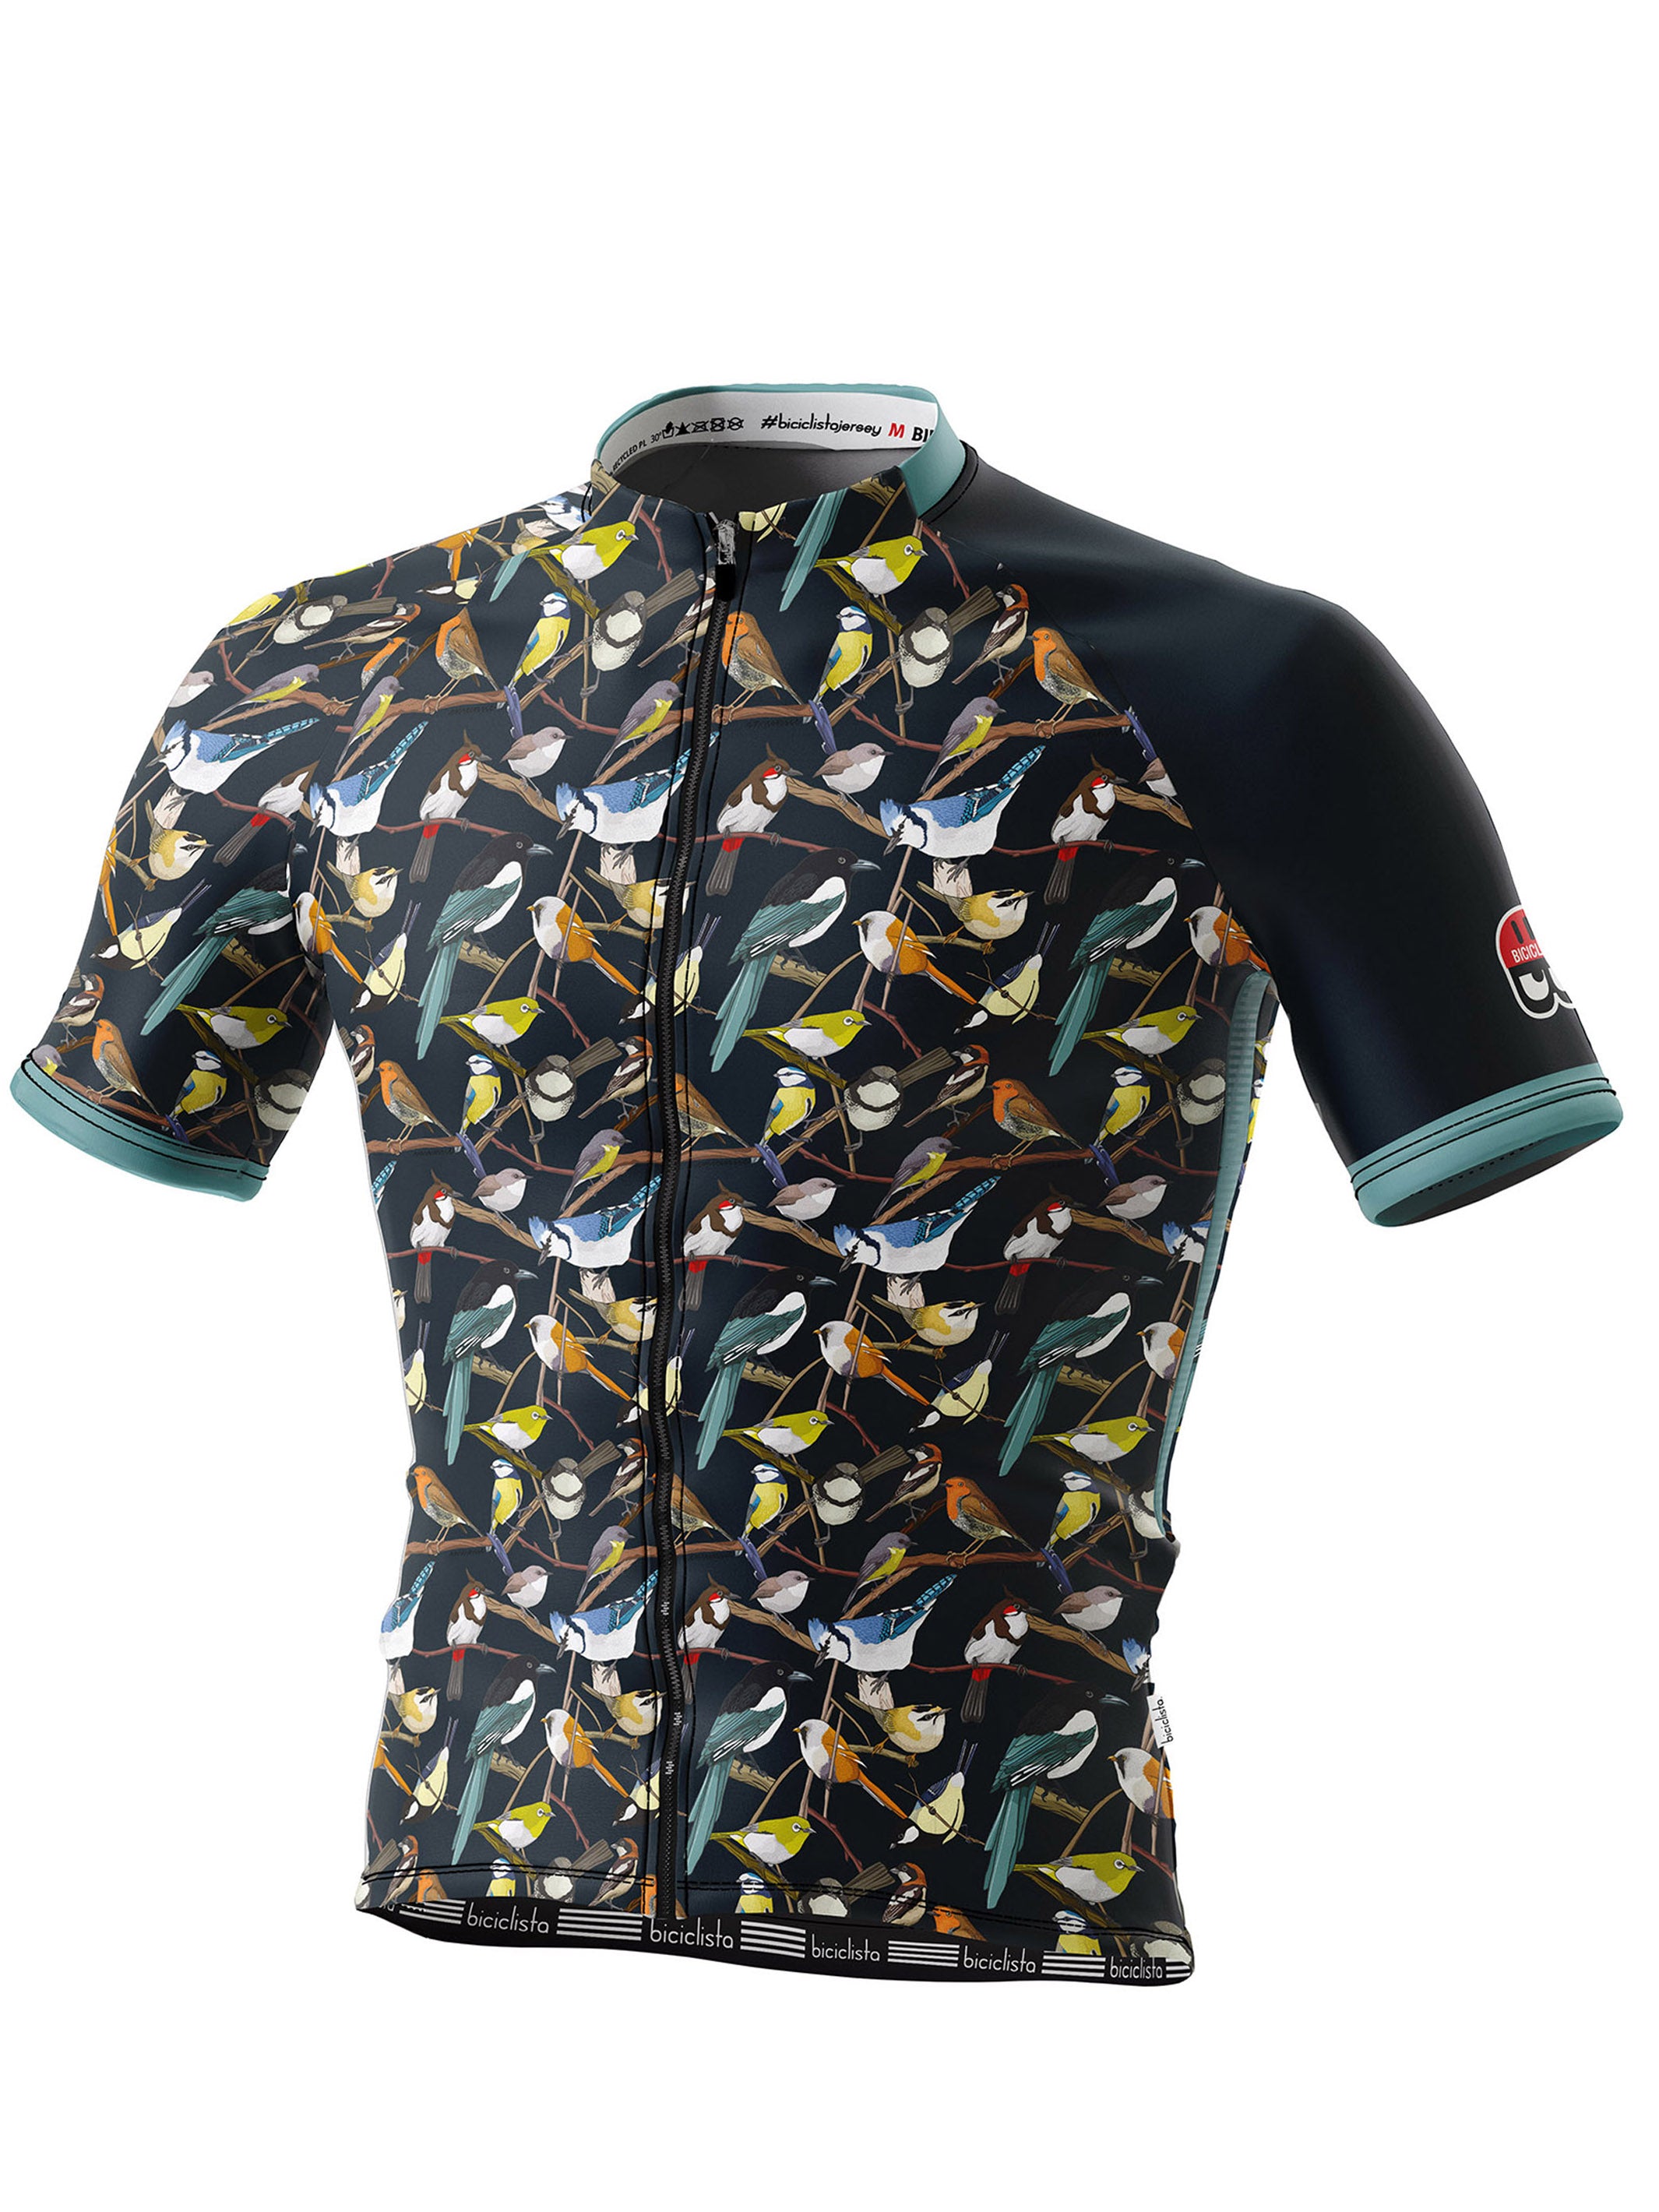 THE BIRDS - Men's Right-on Jersey